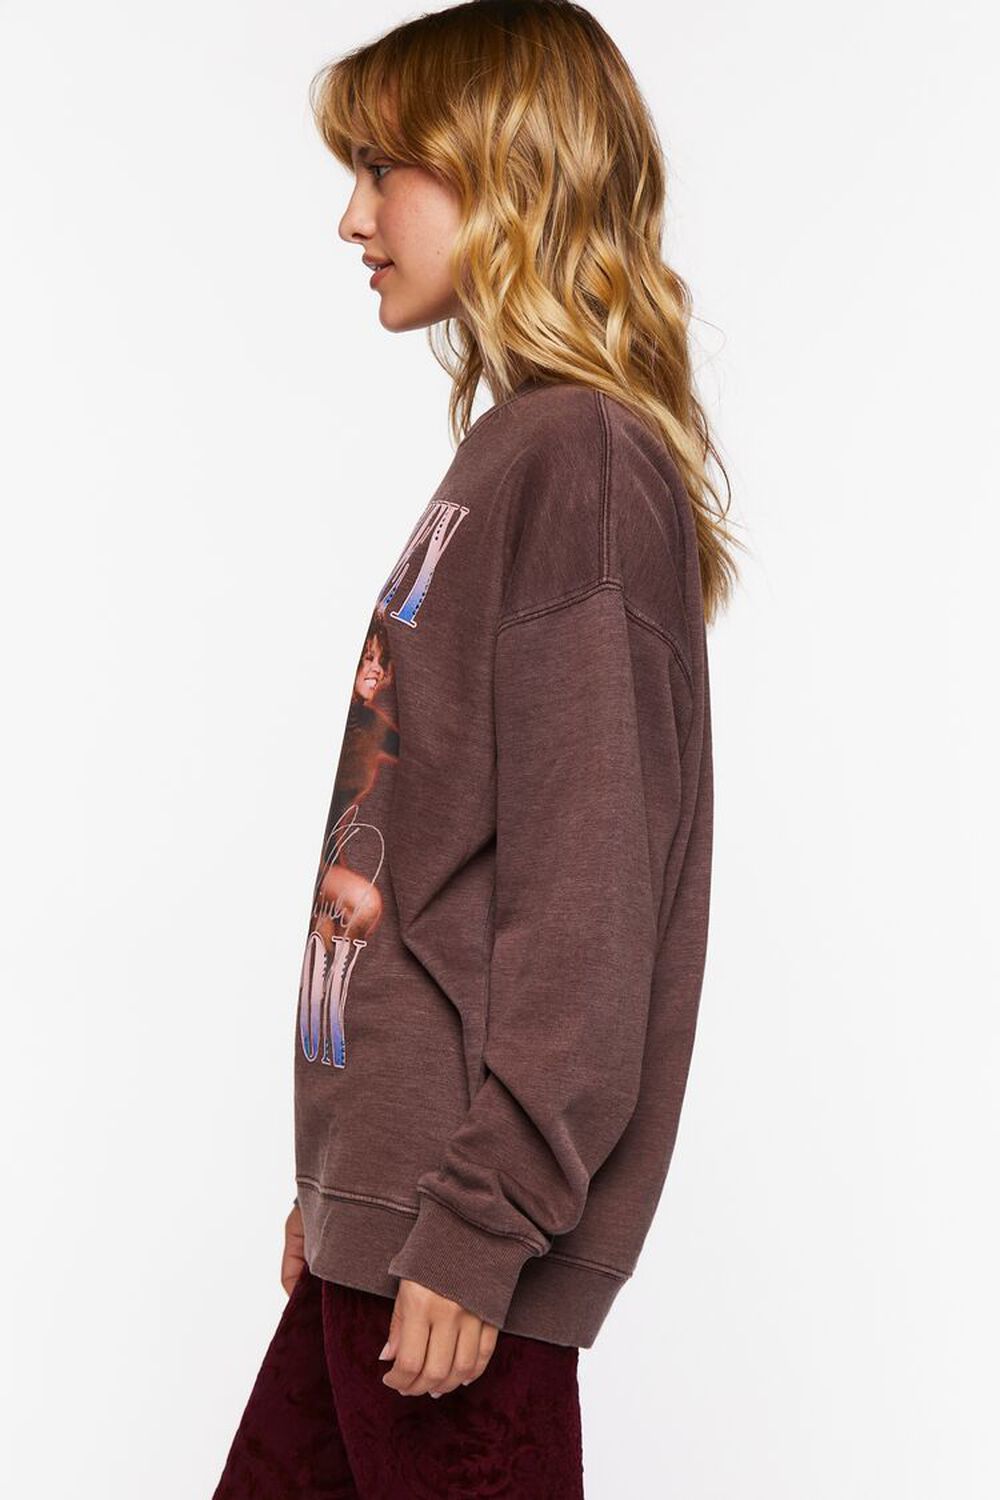 BROWN/MULTI Oversized Whitney Houston Graphic Pullover, image 2